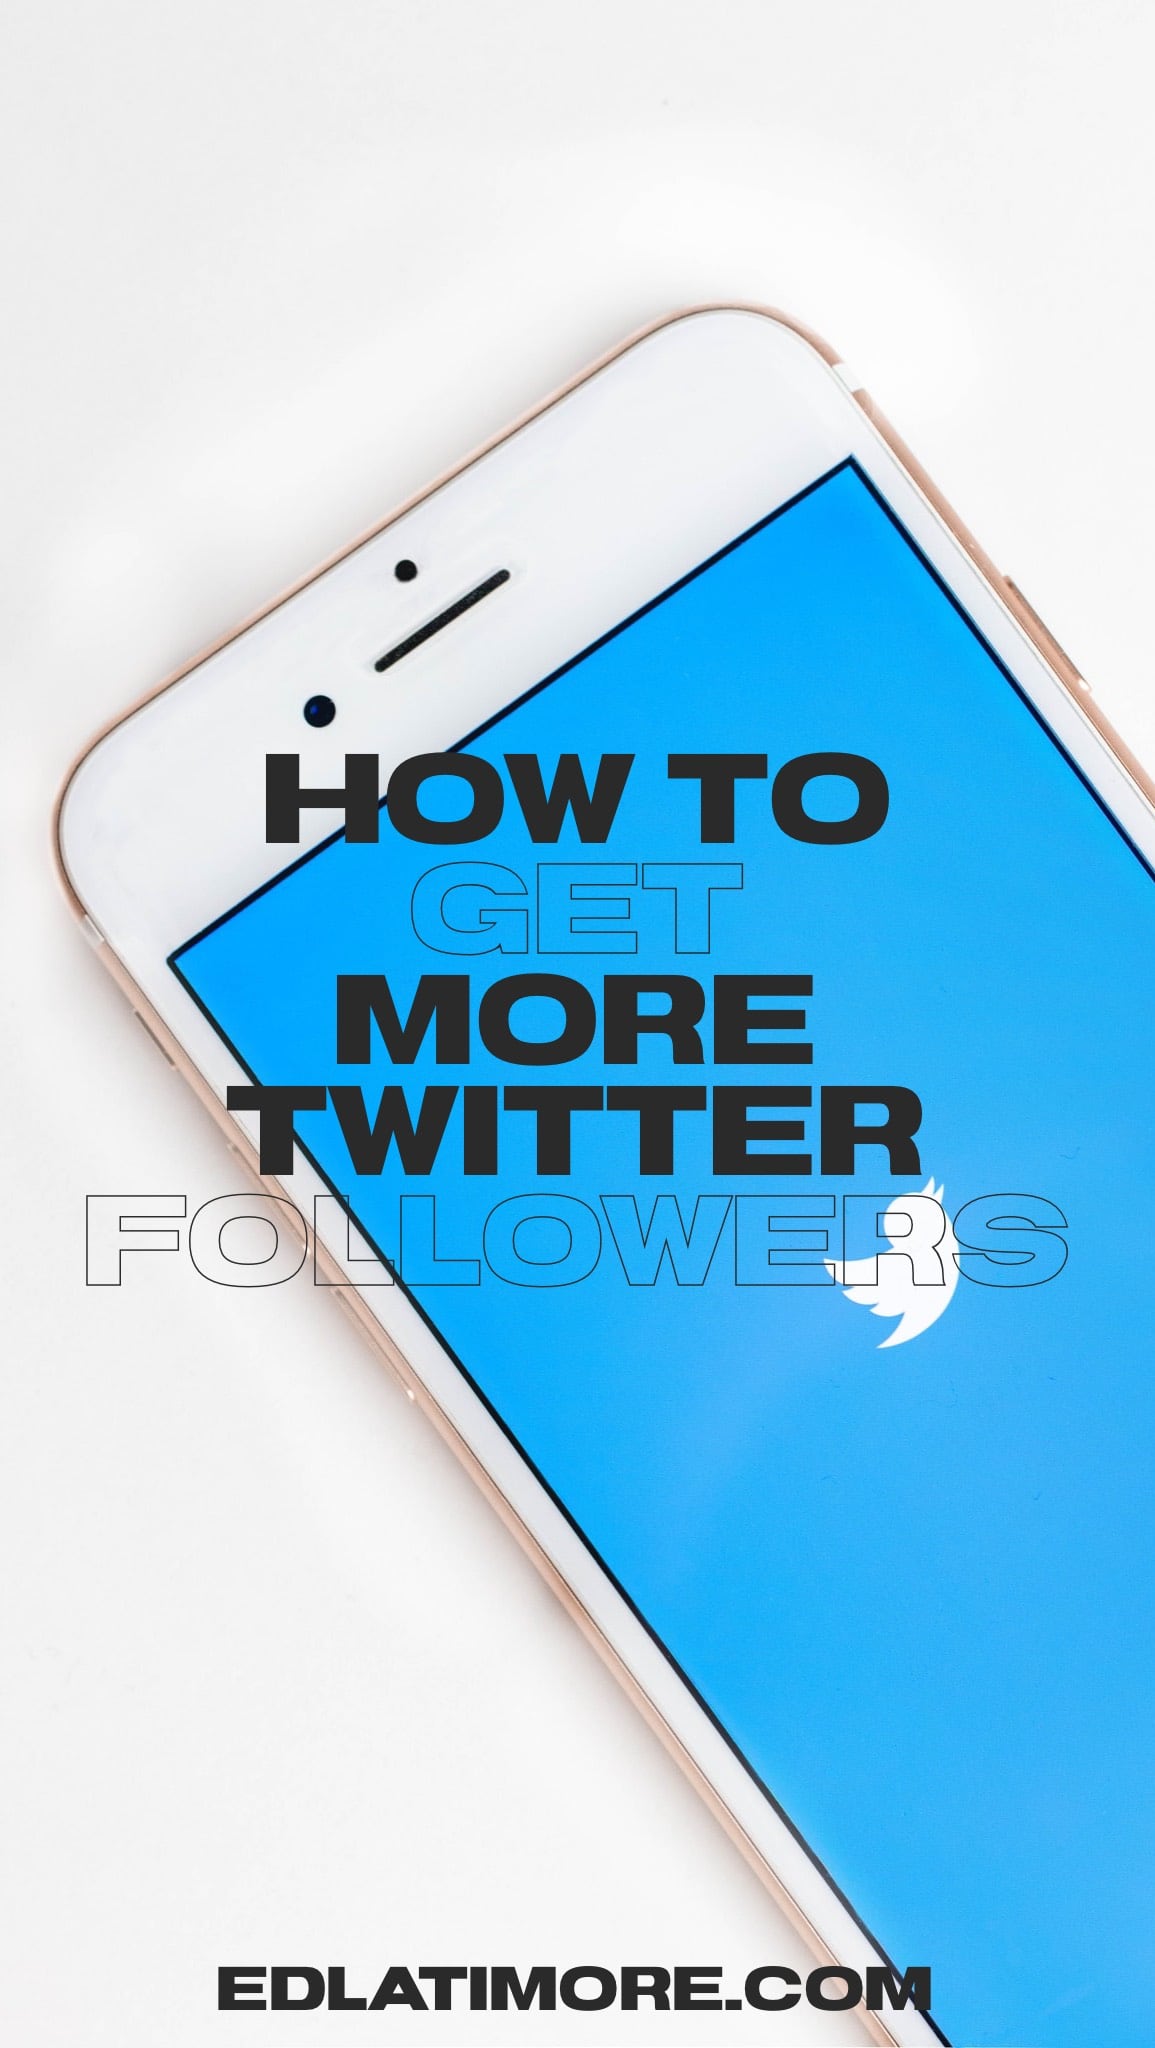 7 proven ways to get more Twitter followers